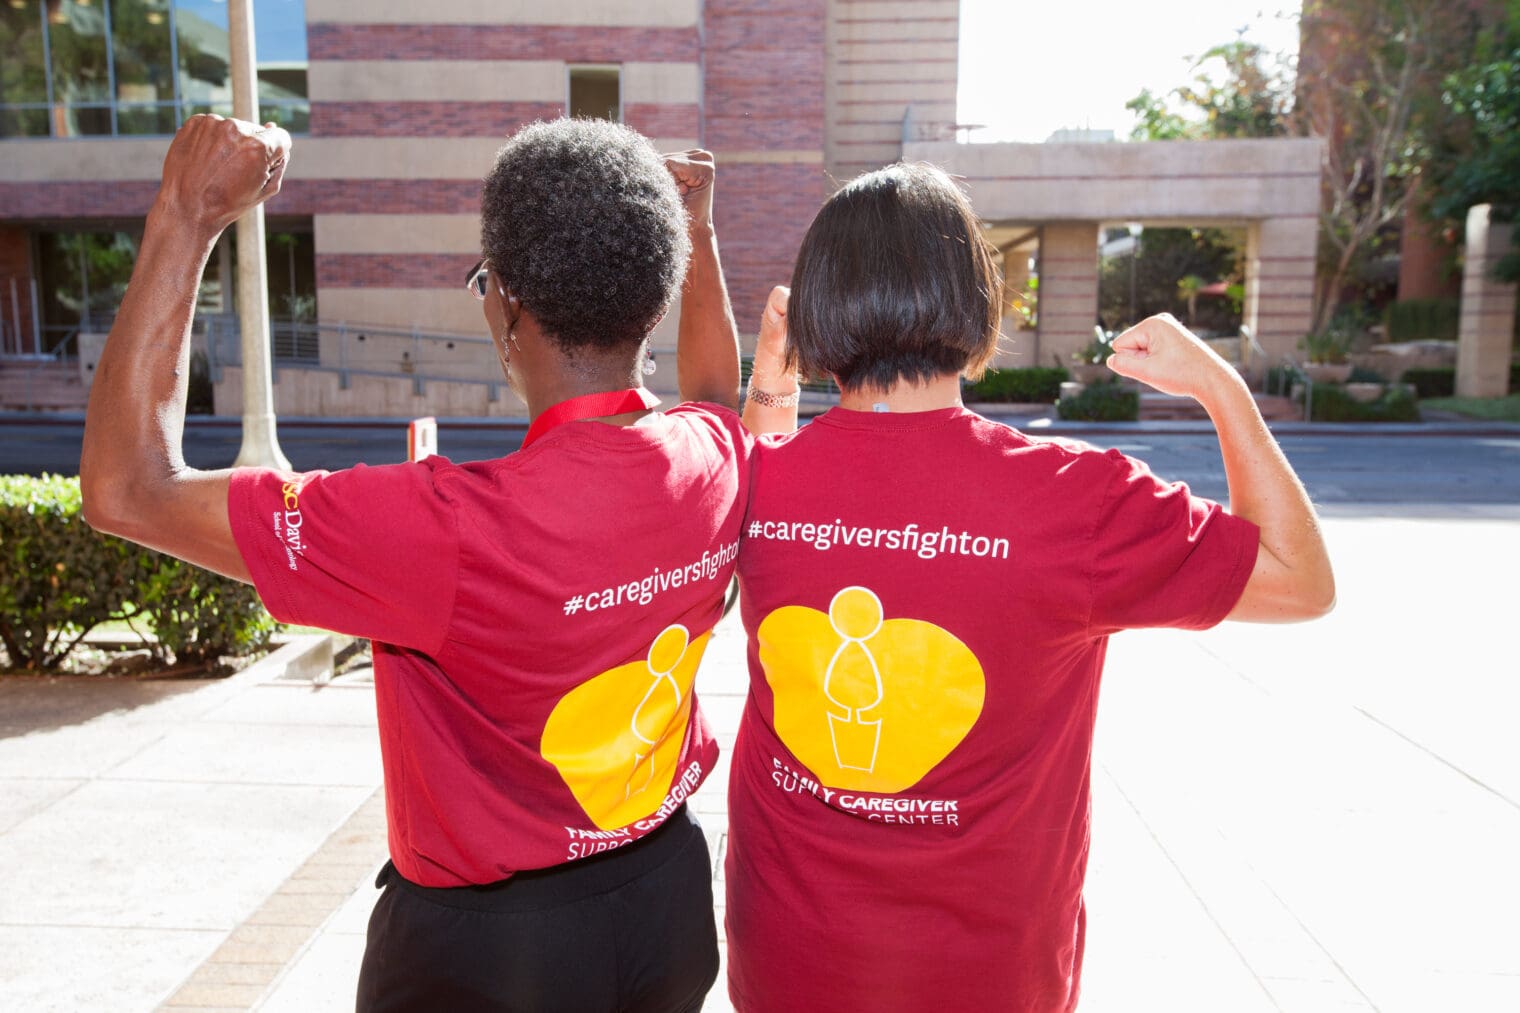 Two women with their backs turned to show their shirts, which say #caregiversfighton and raising their fists